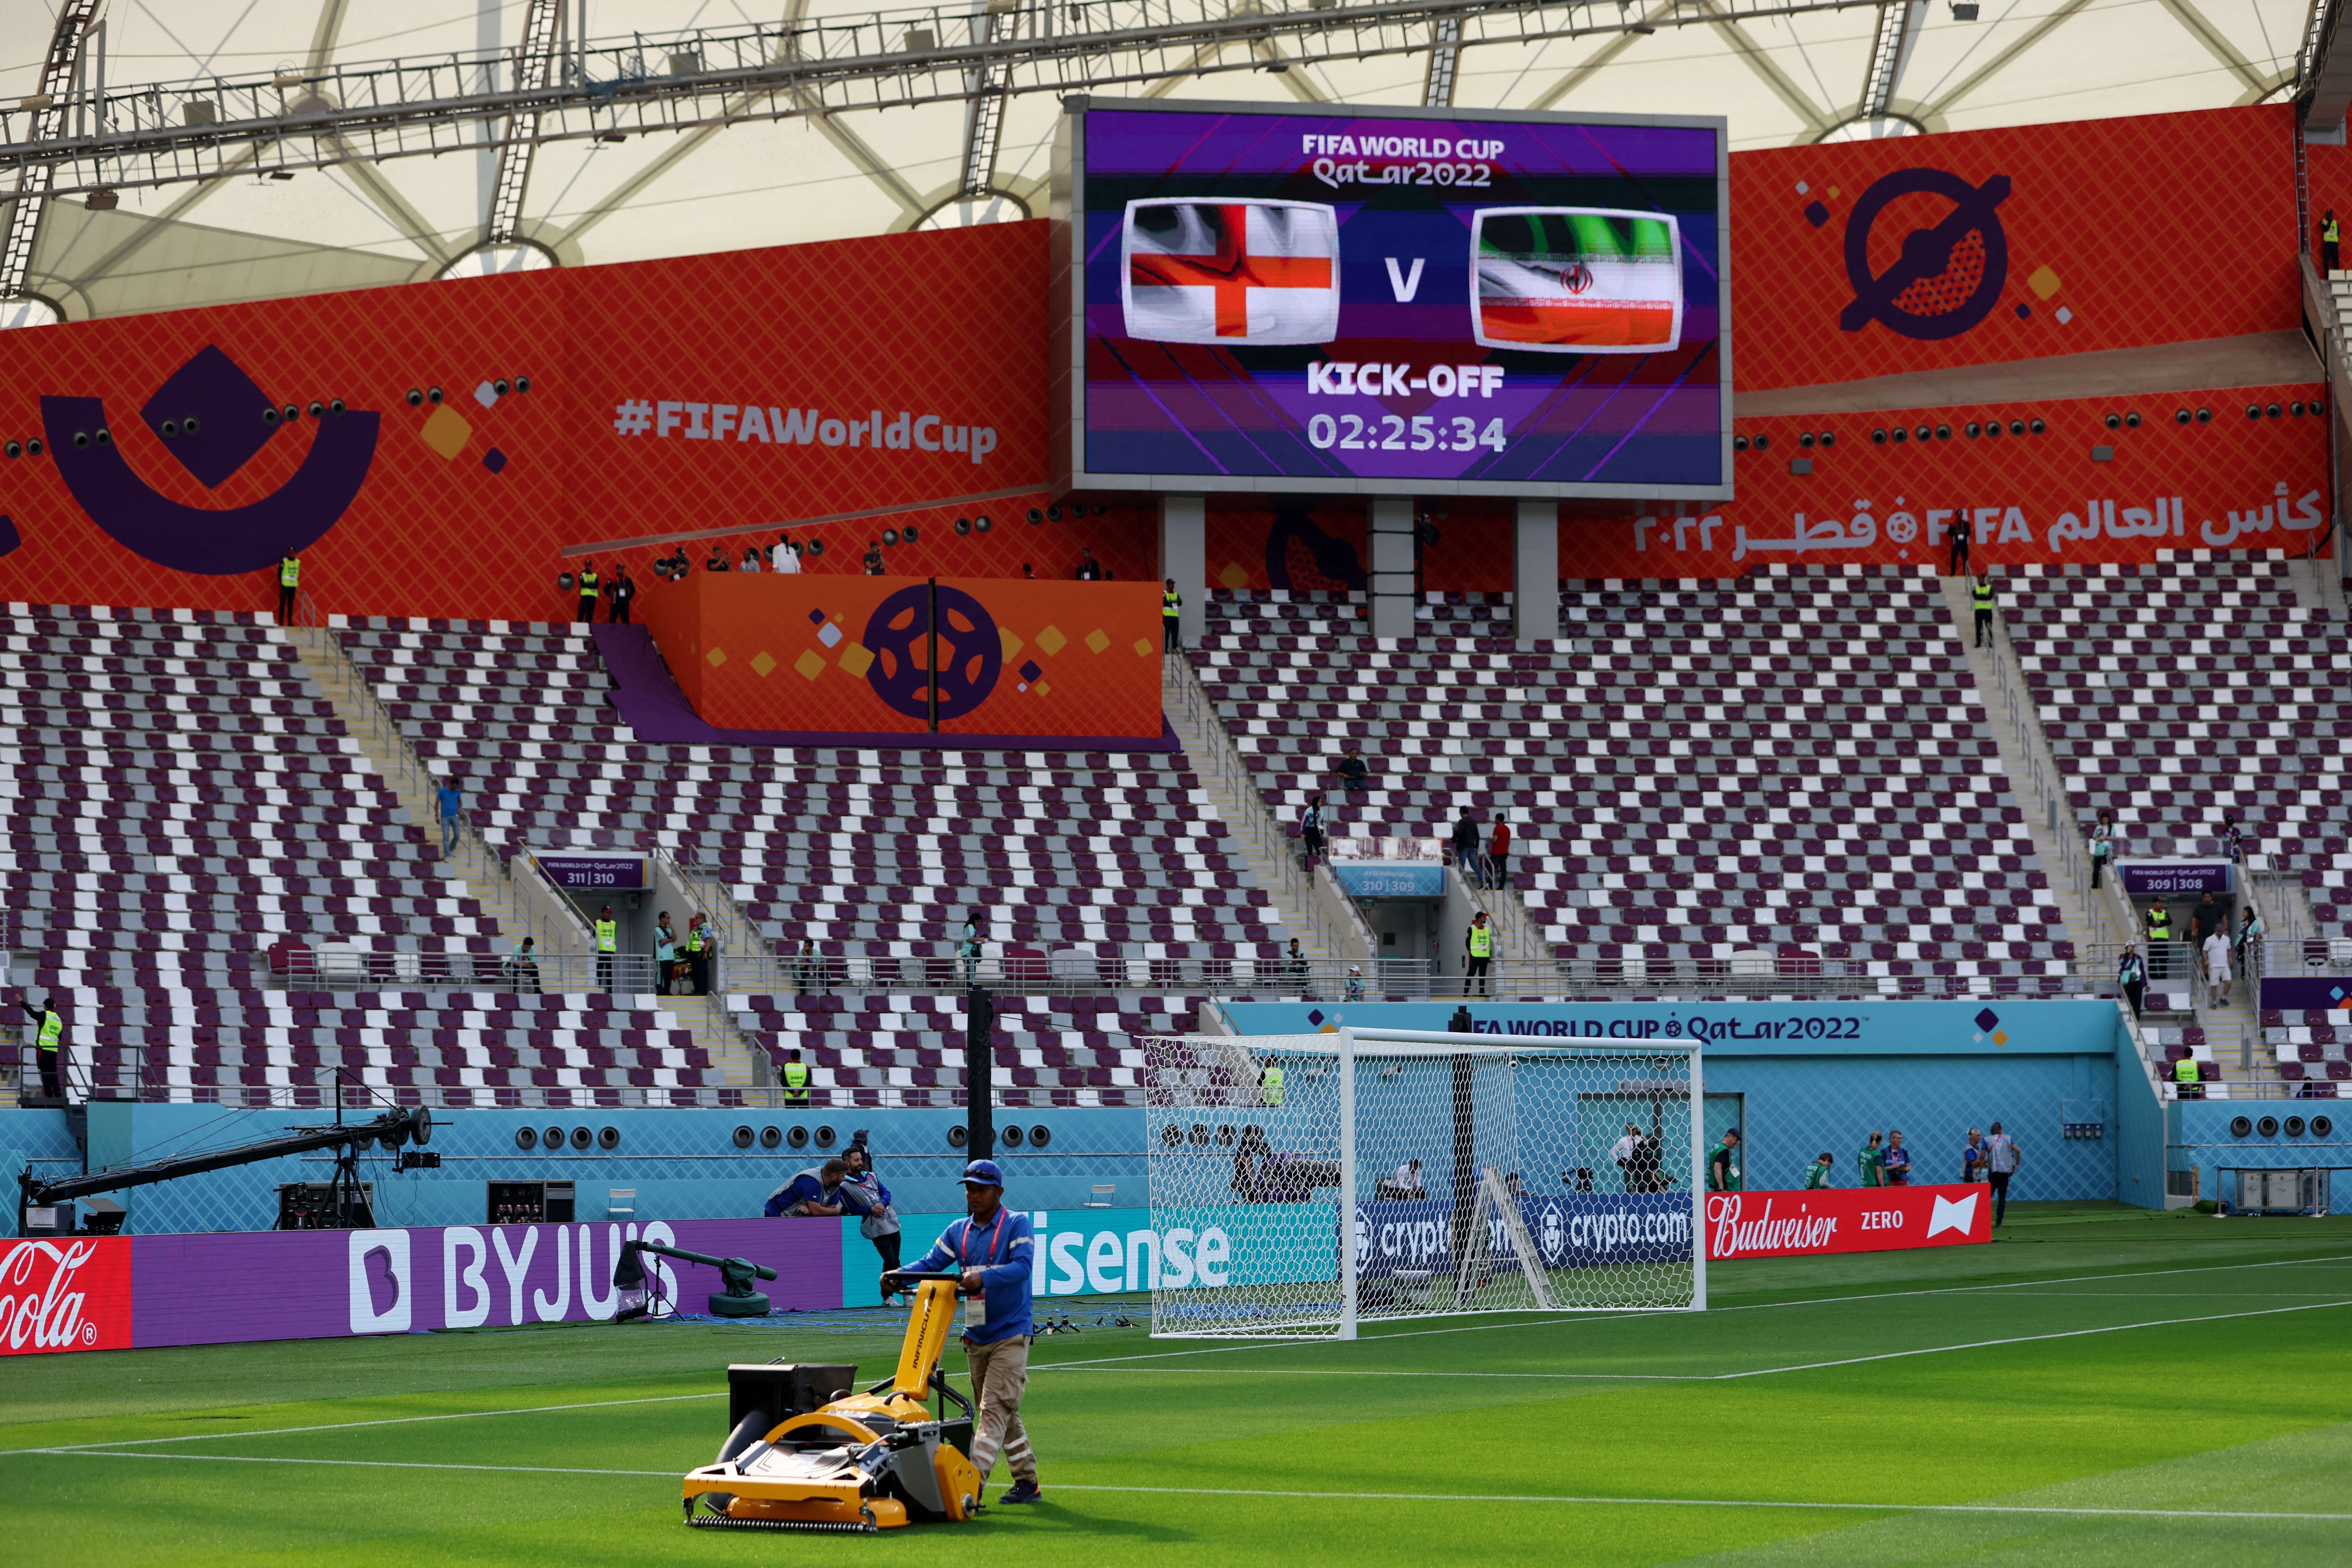 The pitch before England vs Iran.